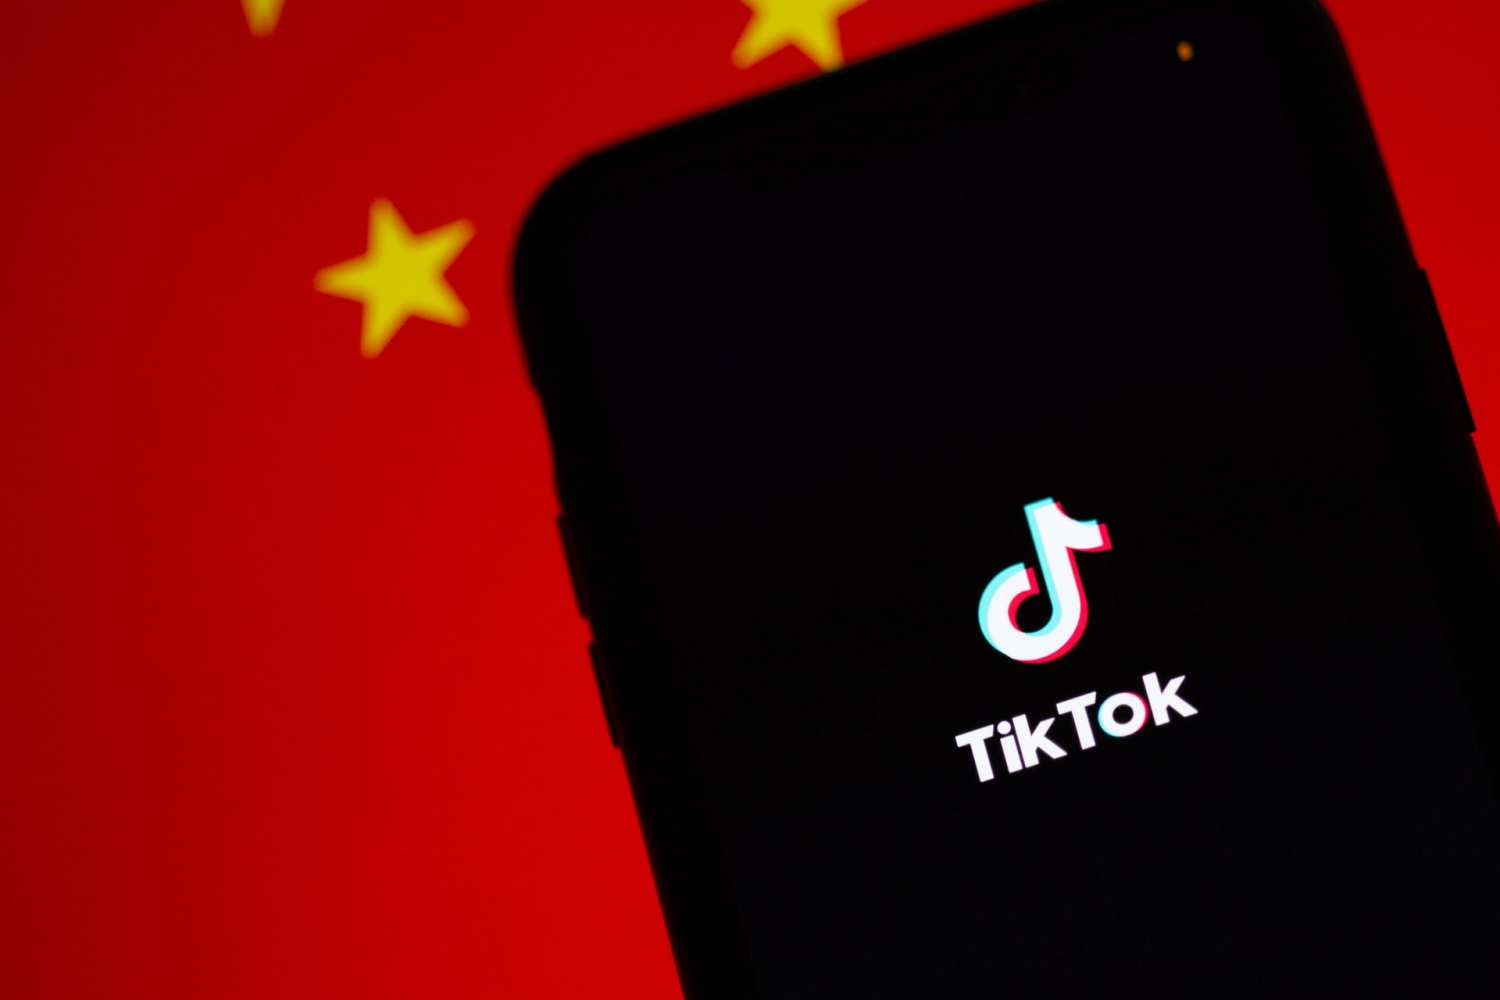 TikTok Owner ByteDance is Limiting Screen Time For Douyin Users Under 14; Restriction Unavailable in the US at the Moment